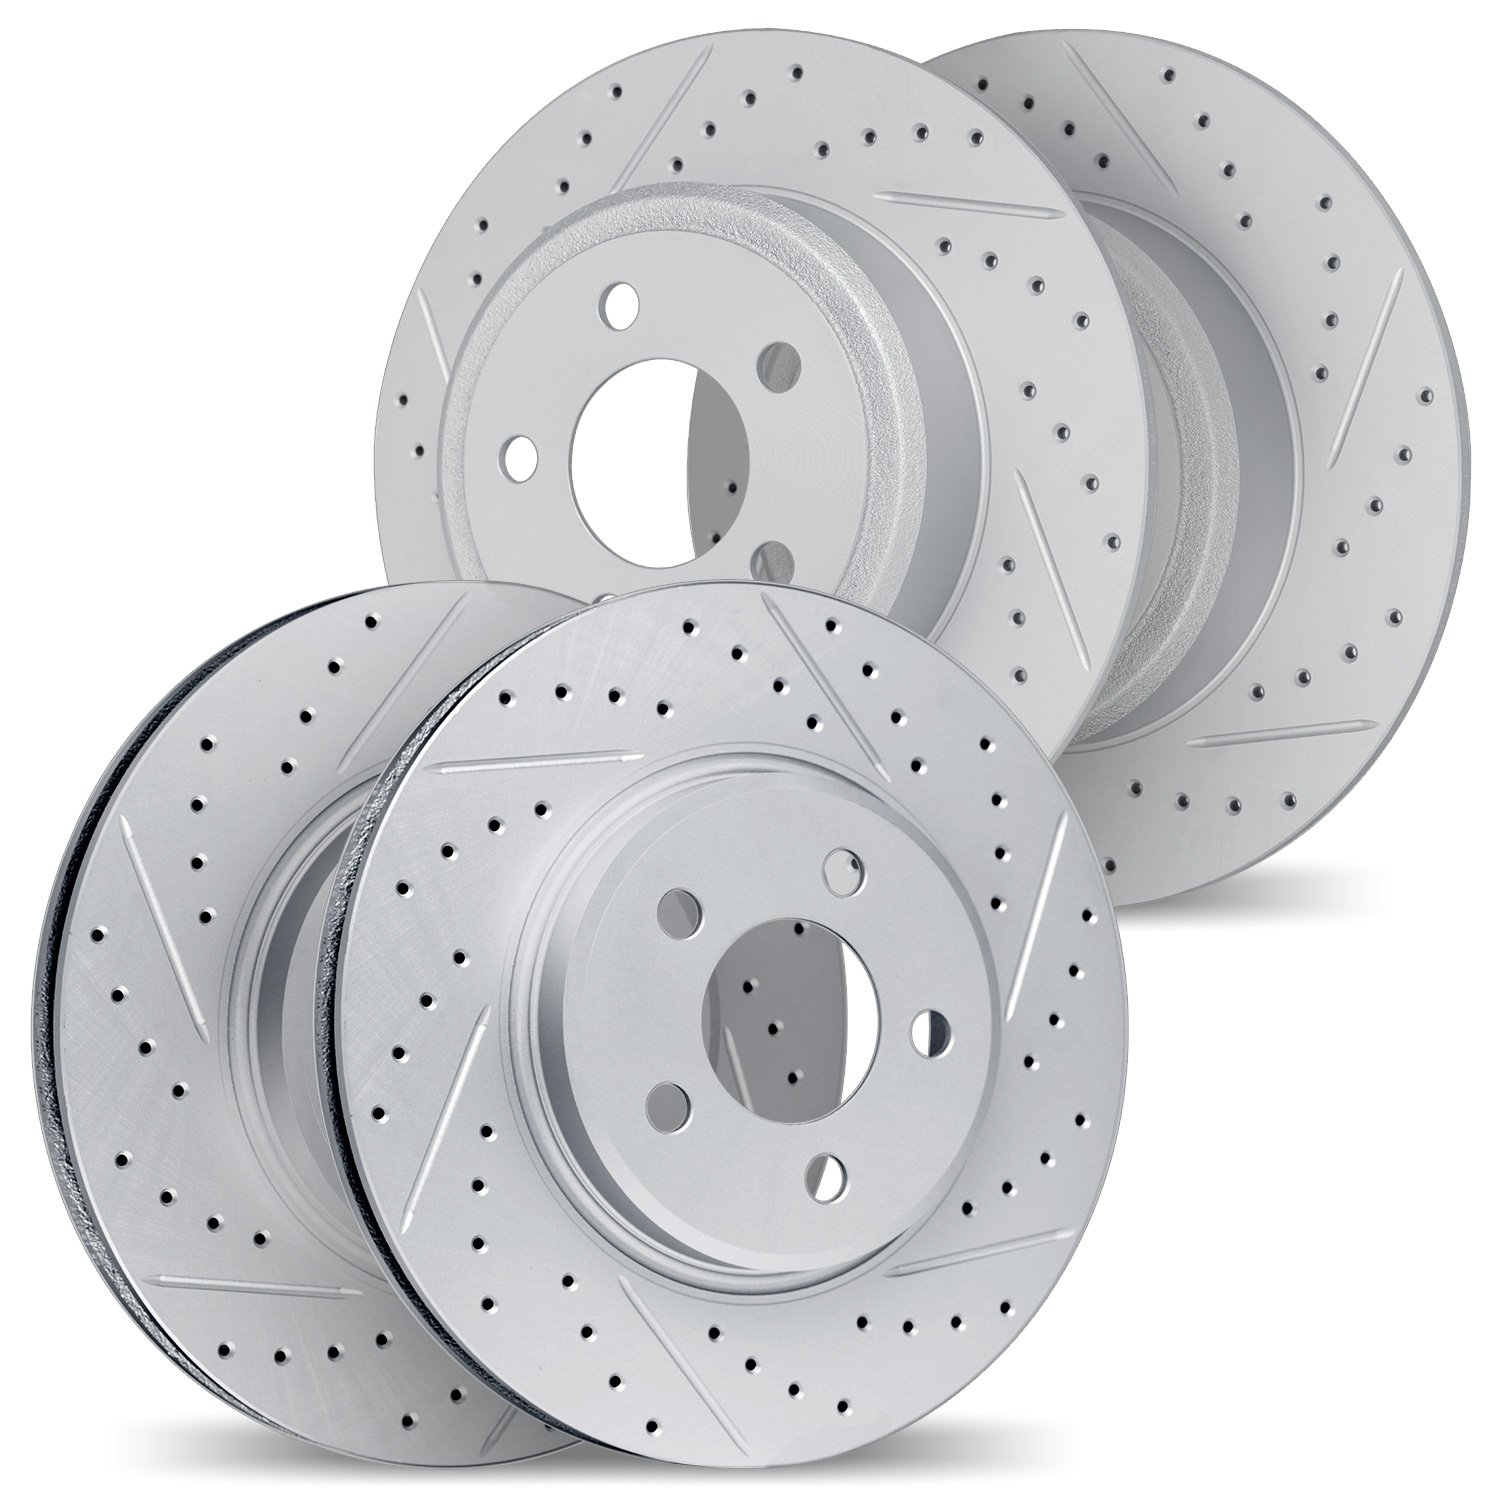 2004-11006 Geoperformance Drilled/Slotted Brake Rotors, 2020-2020 Land Rover, Position: Front and Rear